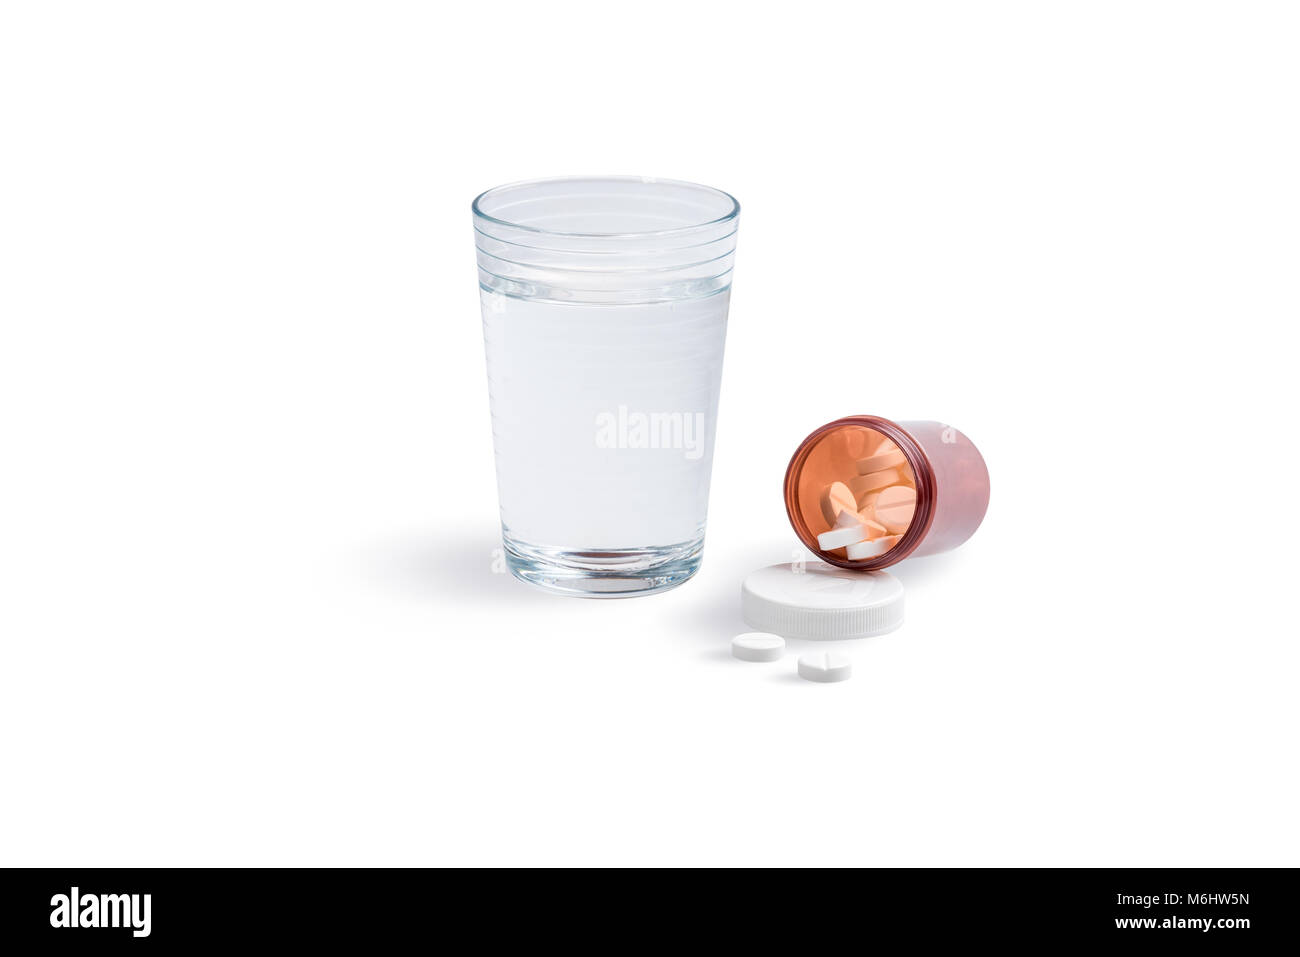 A glass of water with an open bottle of painkillers isolated on a white background. Stock Photo